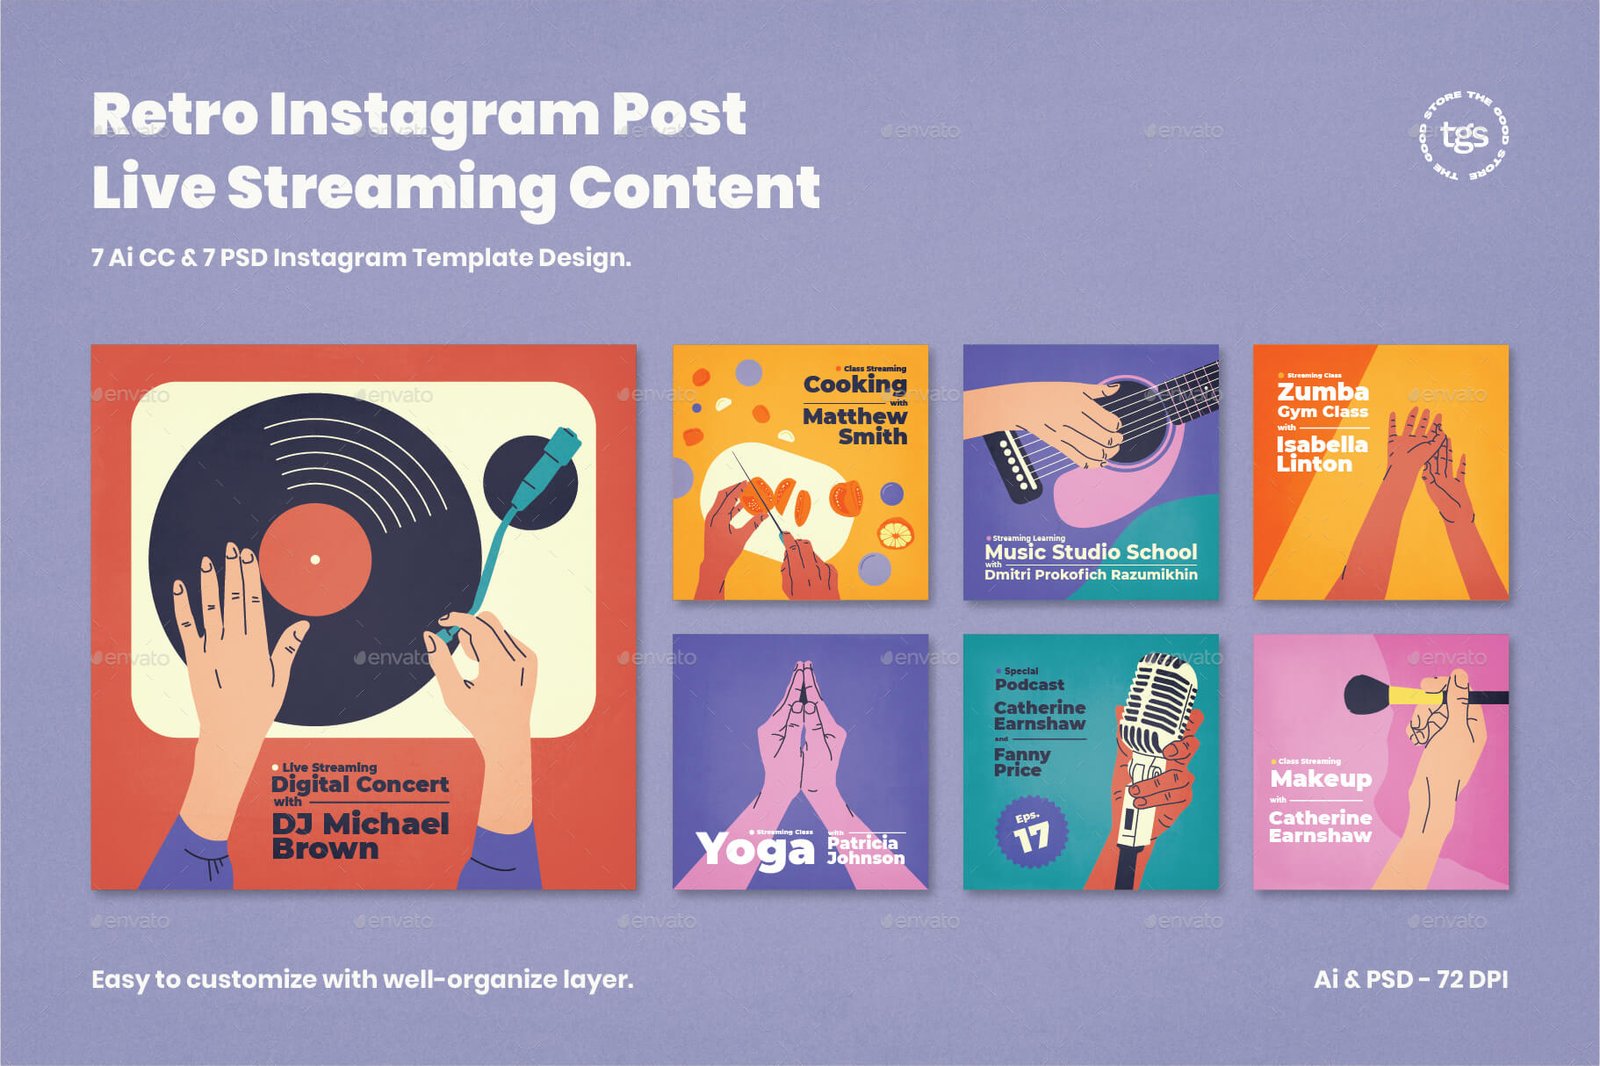 Retro Instagram Post Live Streaming Content & Podcast Cover